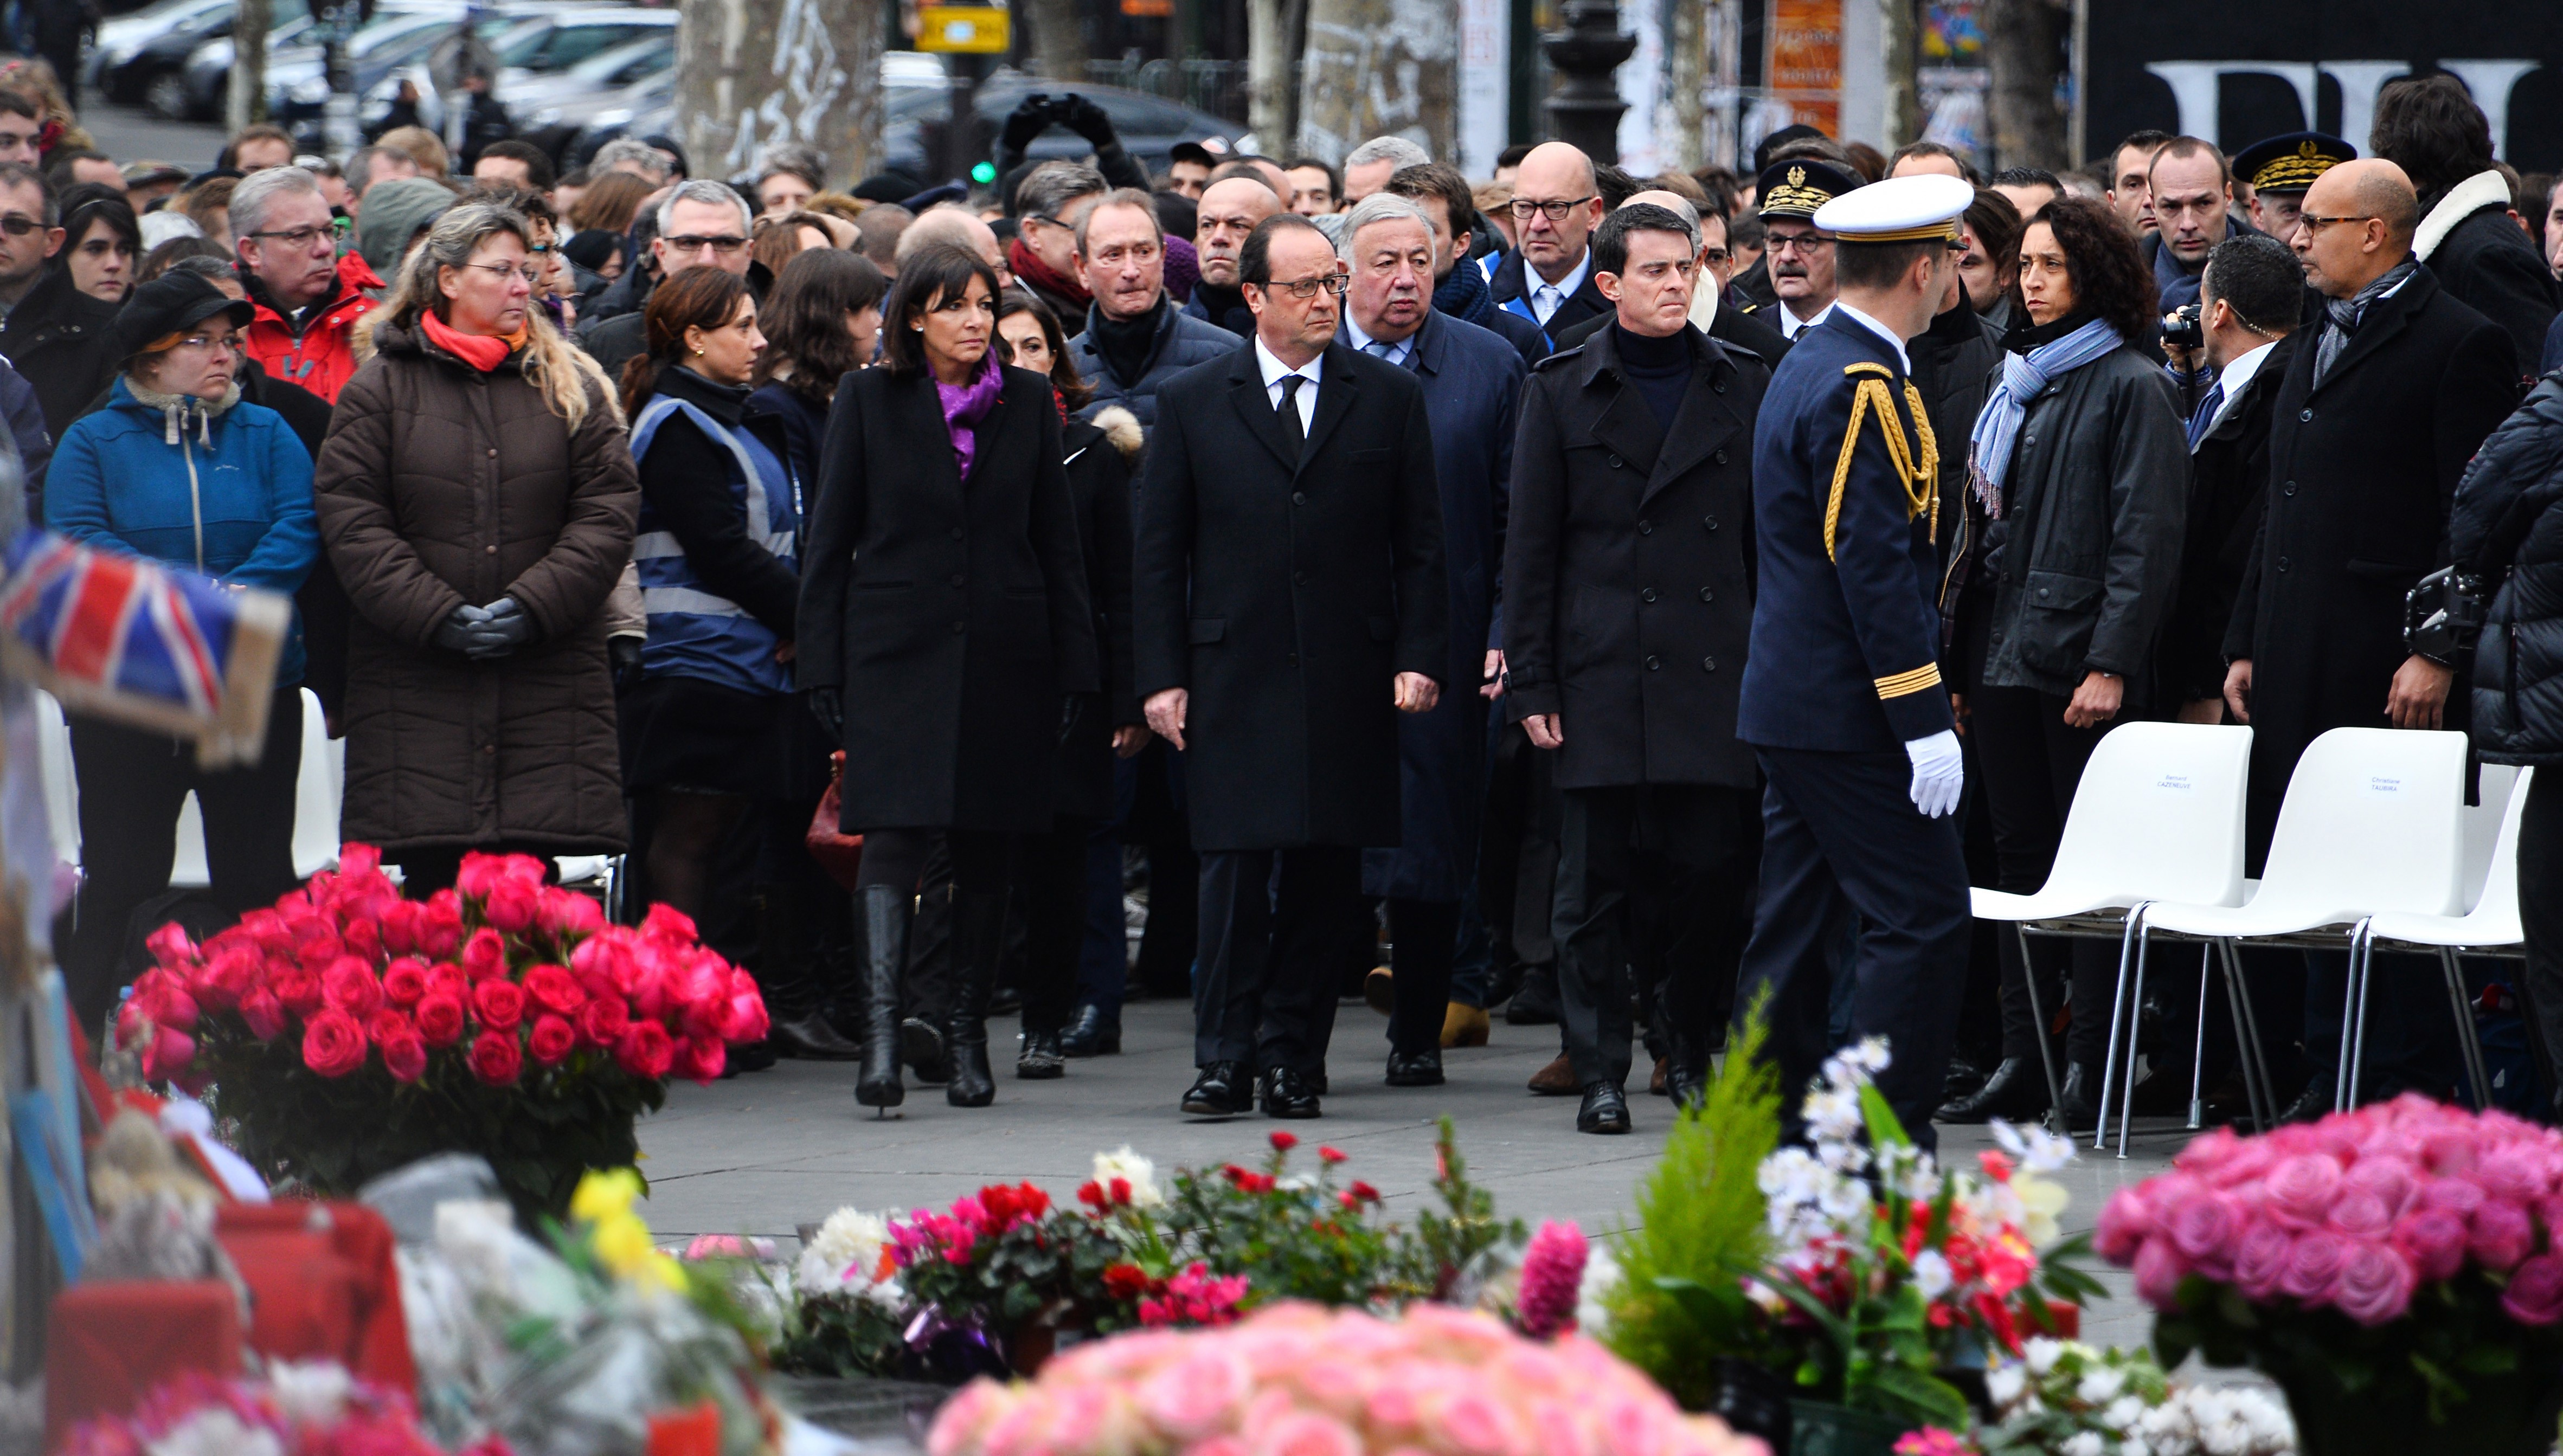 French President Francois Hollande attends a commemoration ceremony rally for Charlie Hebdo attack, at Place de la Republique in Paris on Jan. 10, 2016. (Mustafa Yalcin—Anadolu Agency/Getty Images)